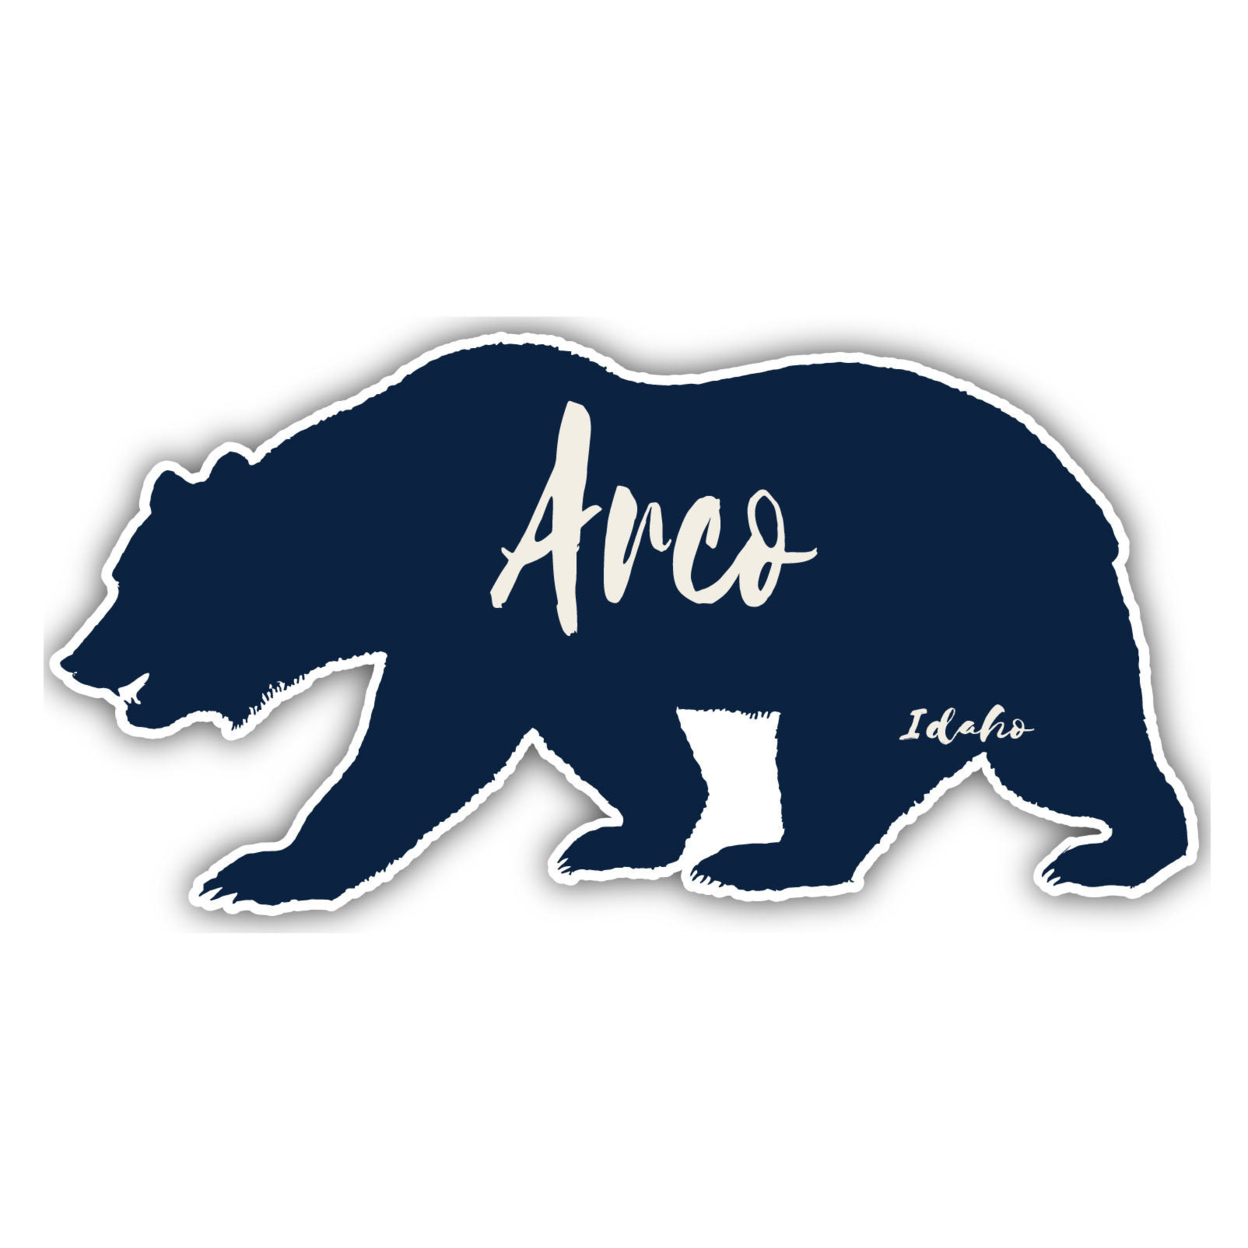 Arco Idaho Souvenir Decorative Stickers (Choose Theme And Size) - 4-Pack, 10-Inch, Bear